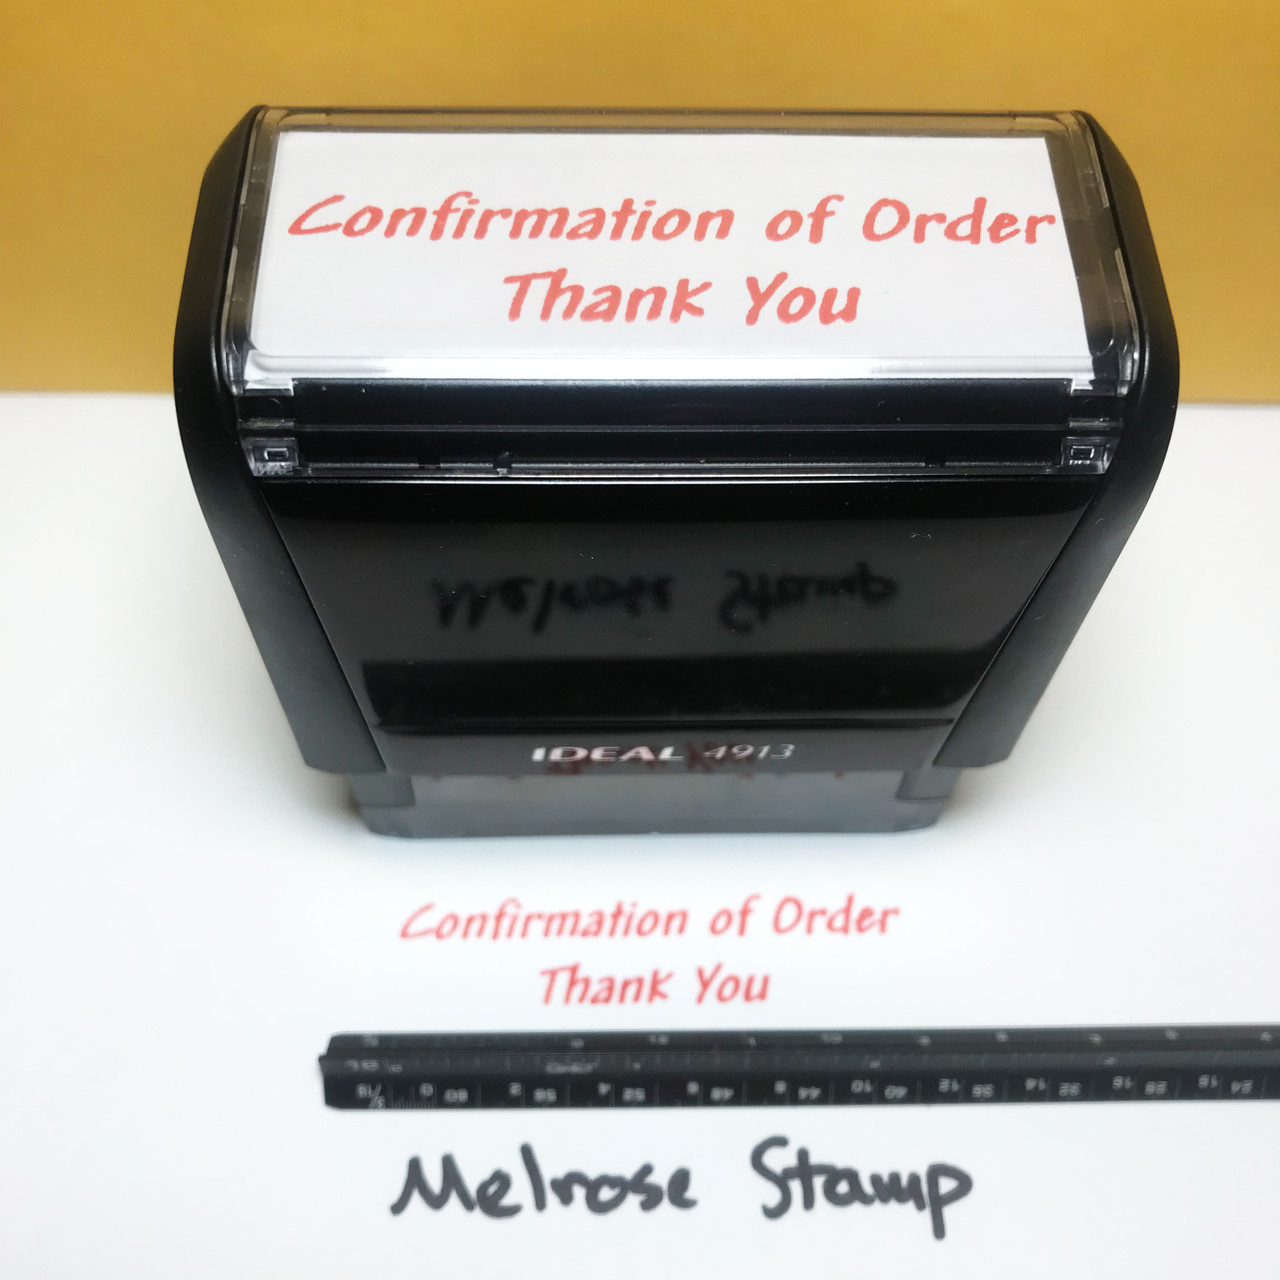 CONFIRMATION OF ORDER THANK YOU Rubber Stamp for office use self-inking -  Melrose Stamp Company